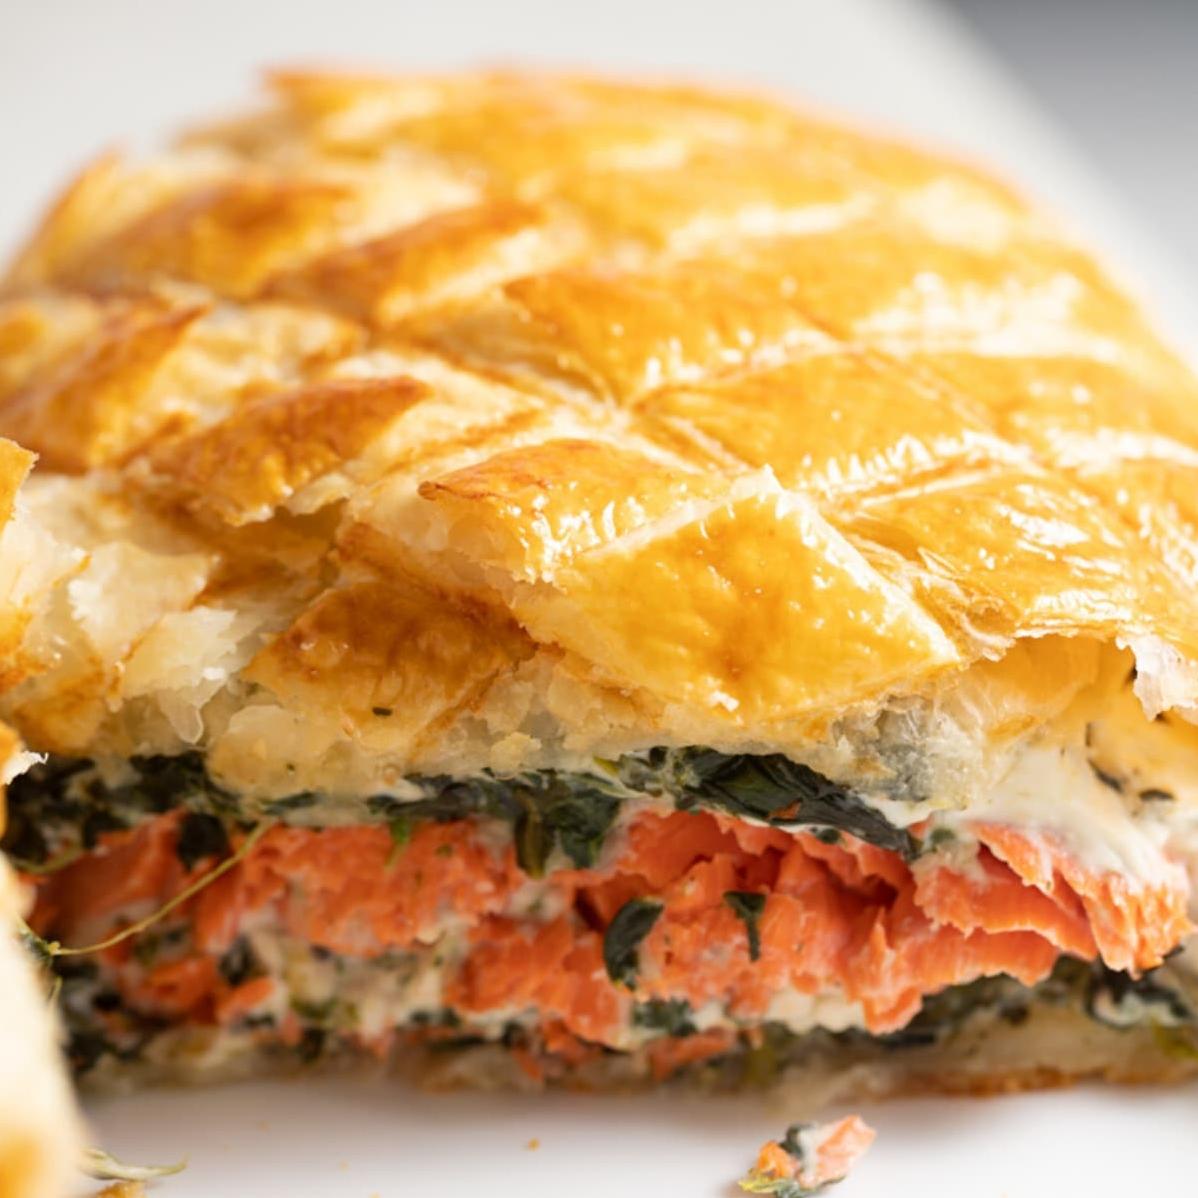  Imagine cutting through the flaky pastry and uncovering the succulent salmon.